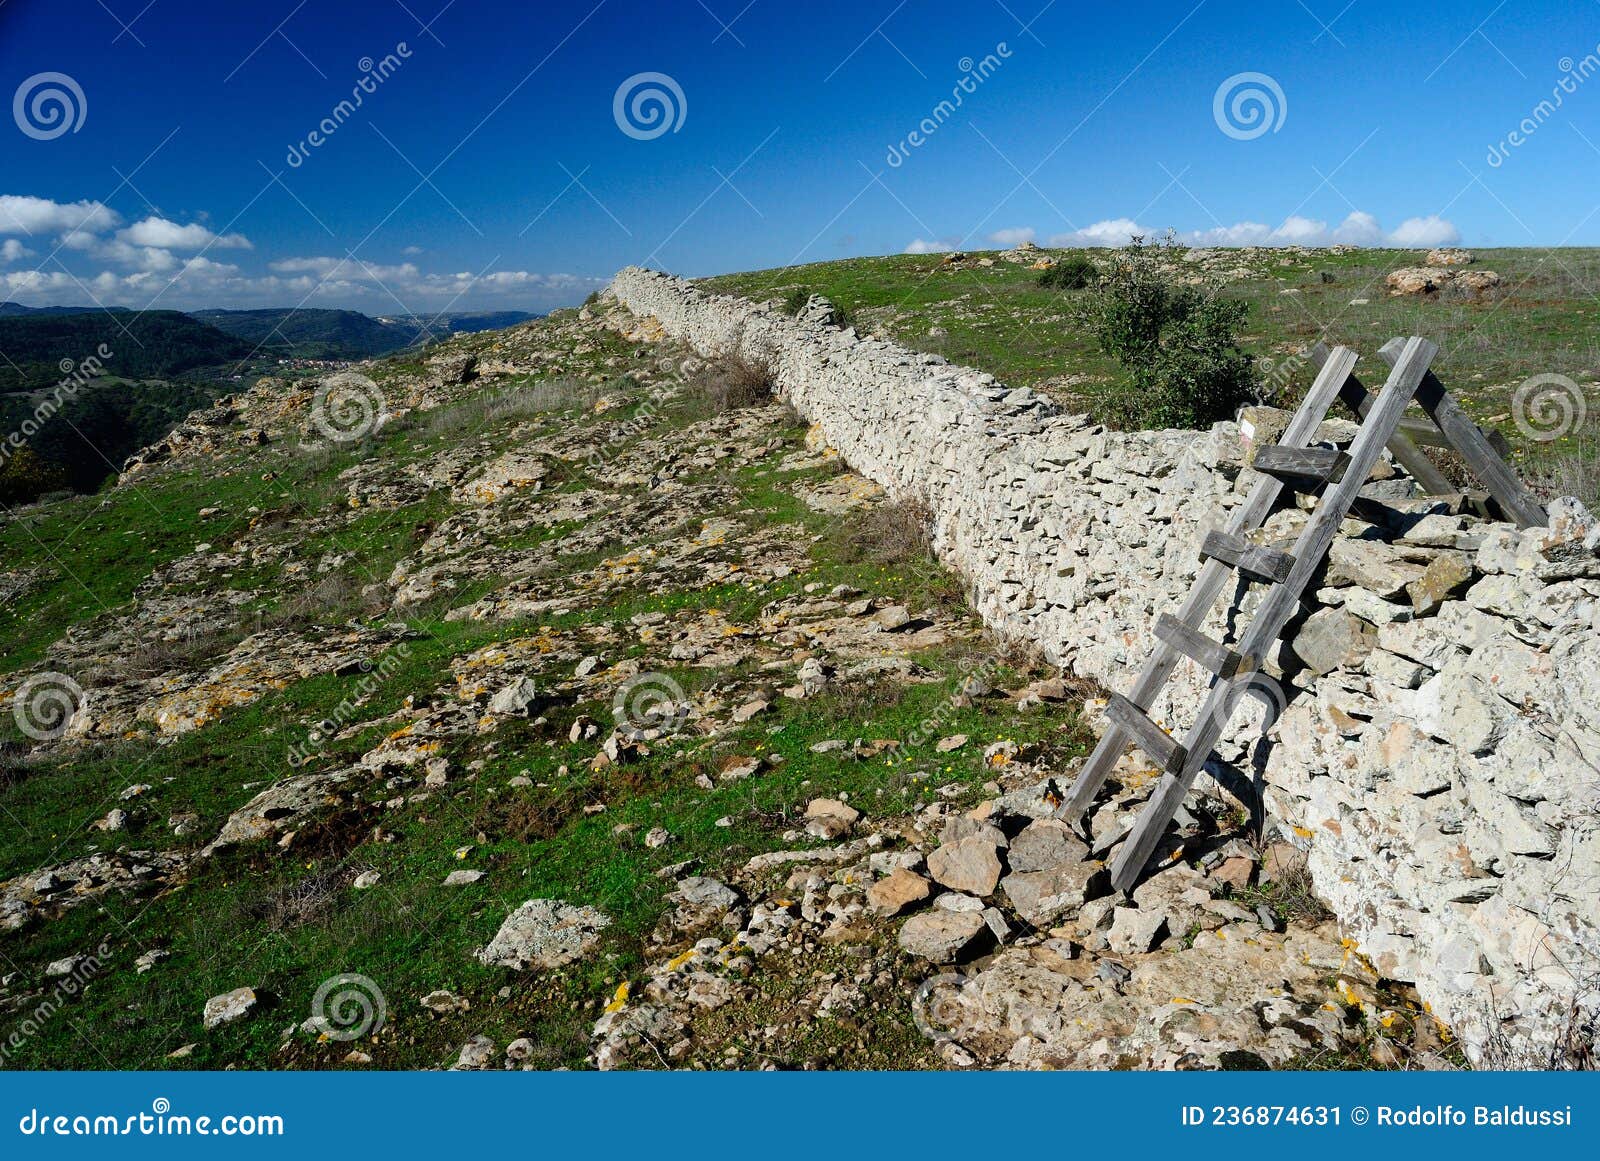 view of stone fence at monte pelao